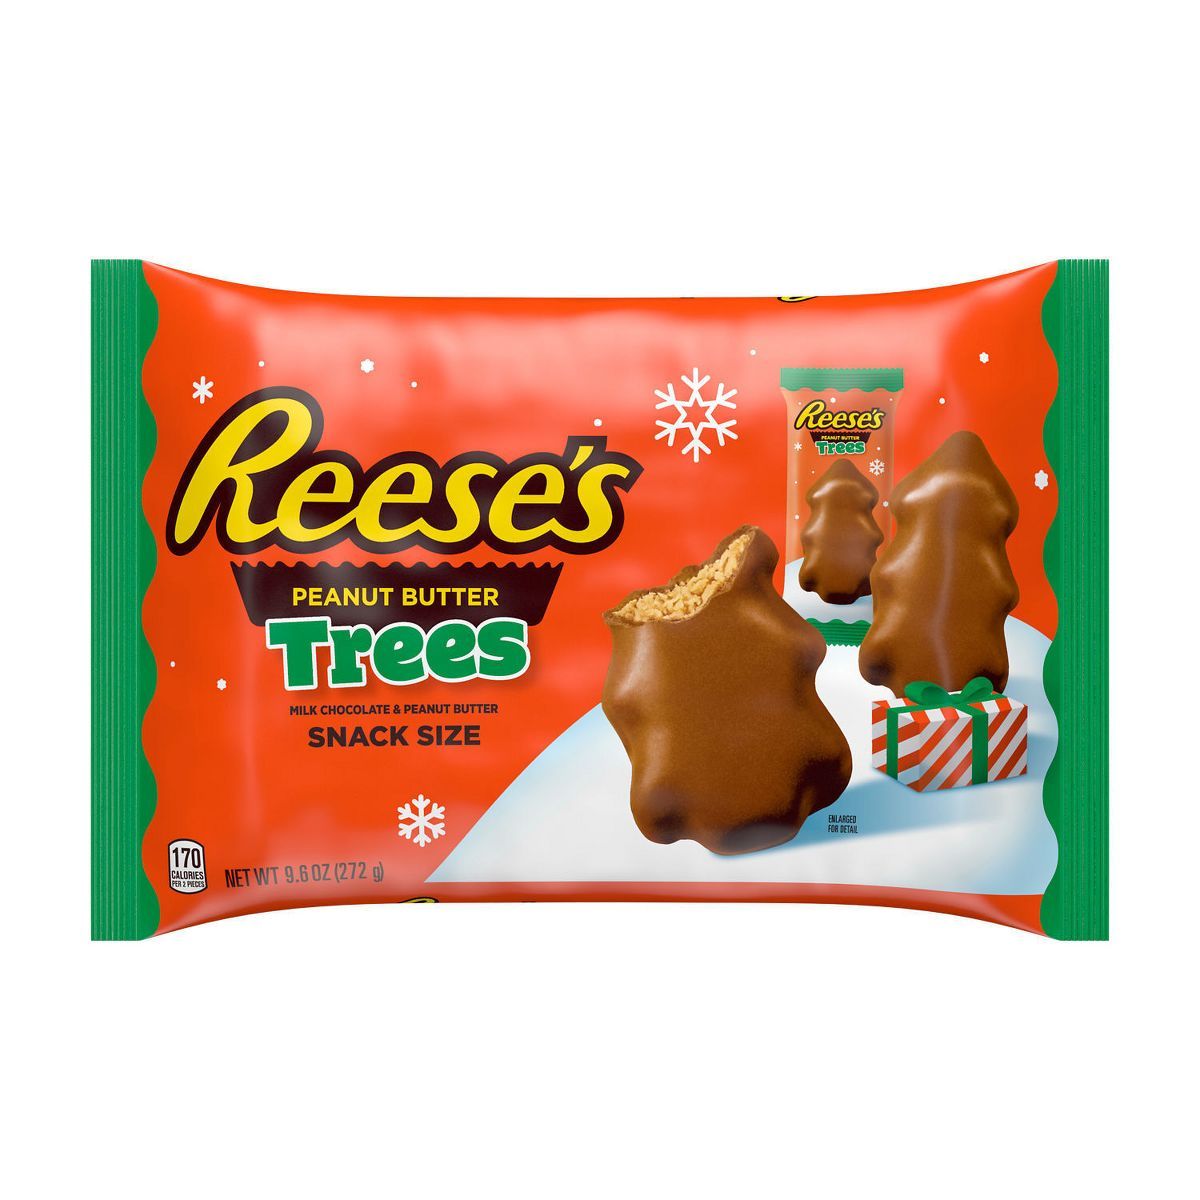 REESE'S Peanut Butter Trees Holiday Candy Snack Size - 9.6oz | Target